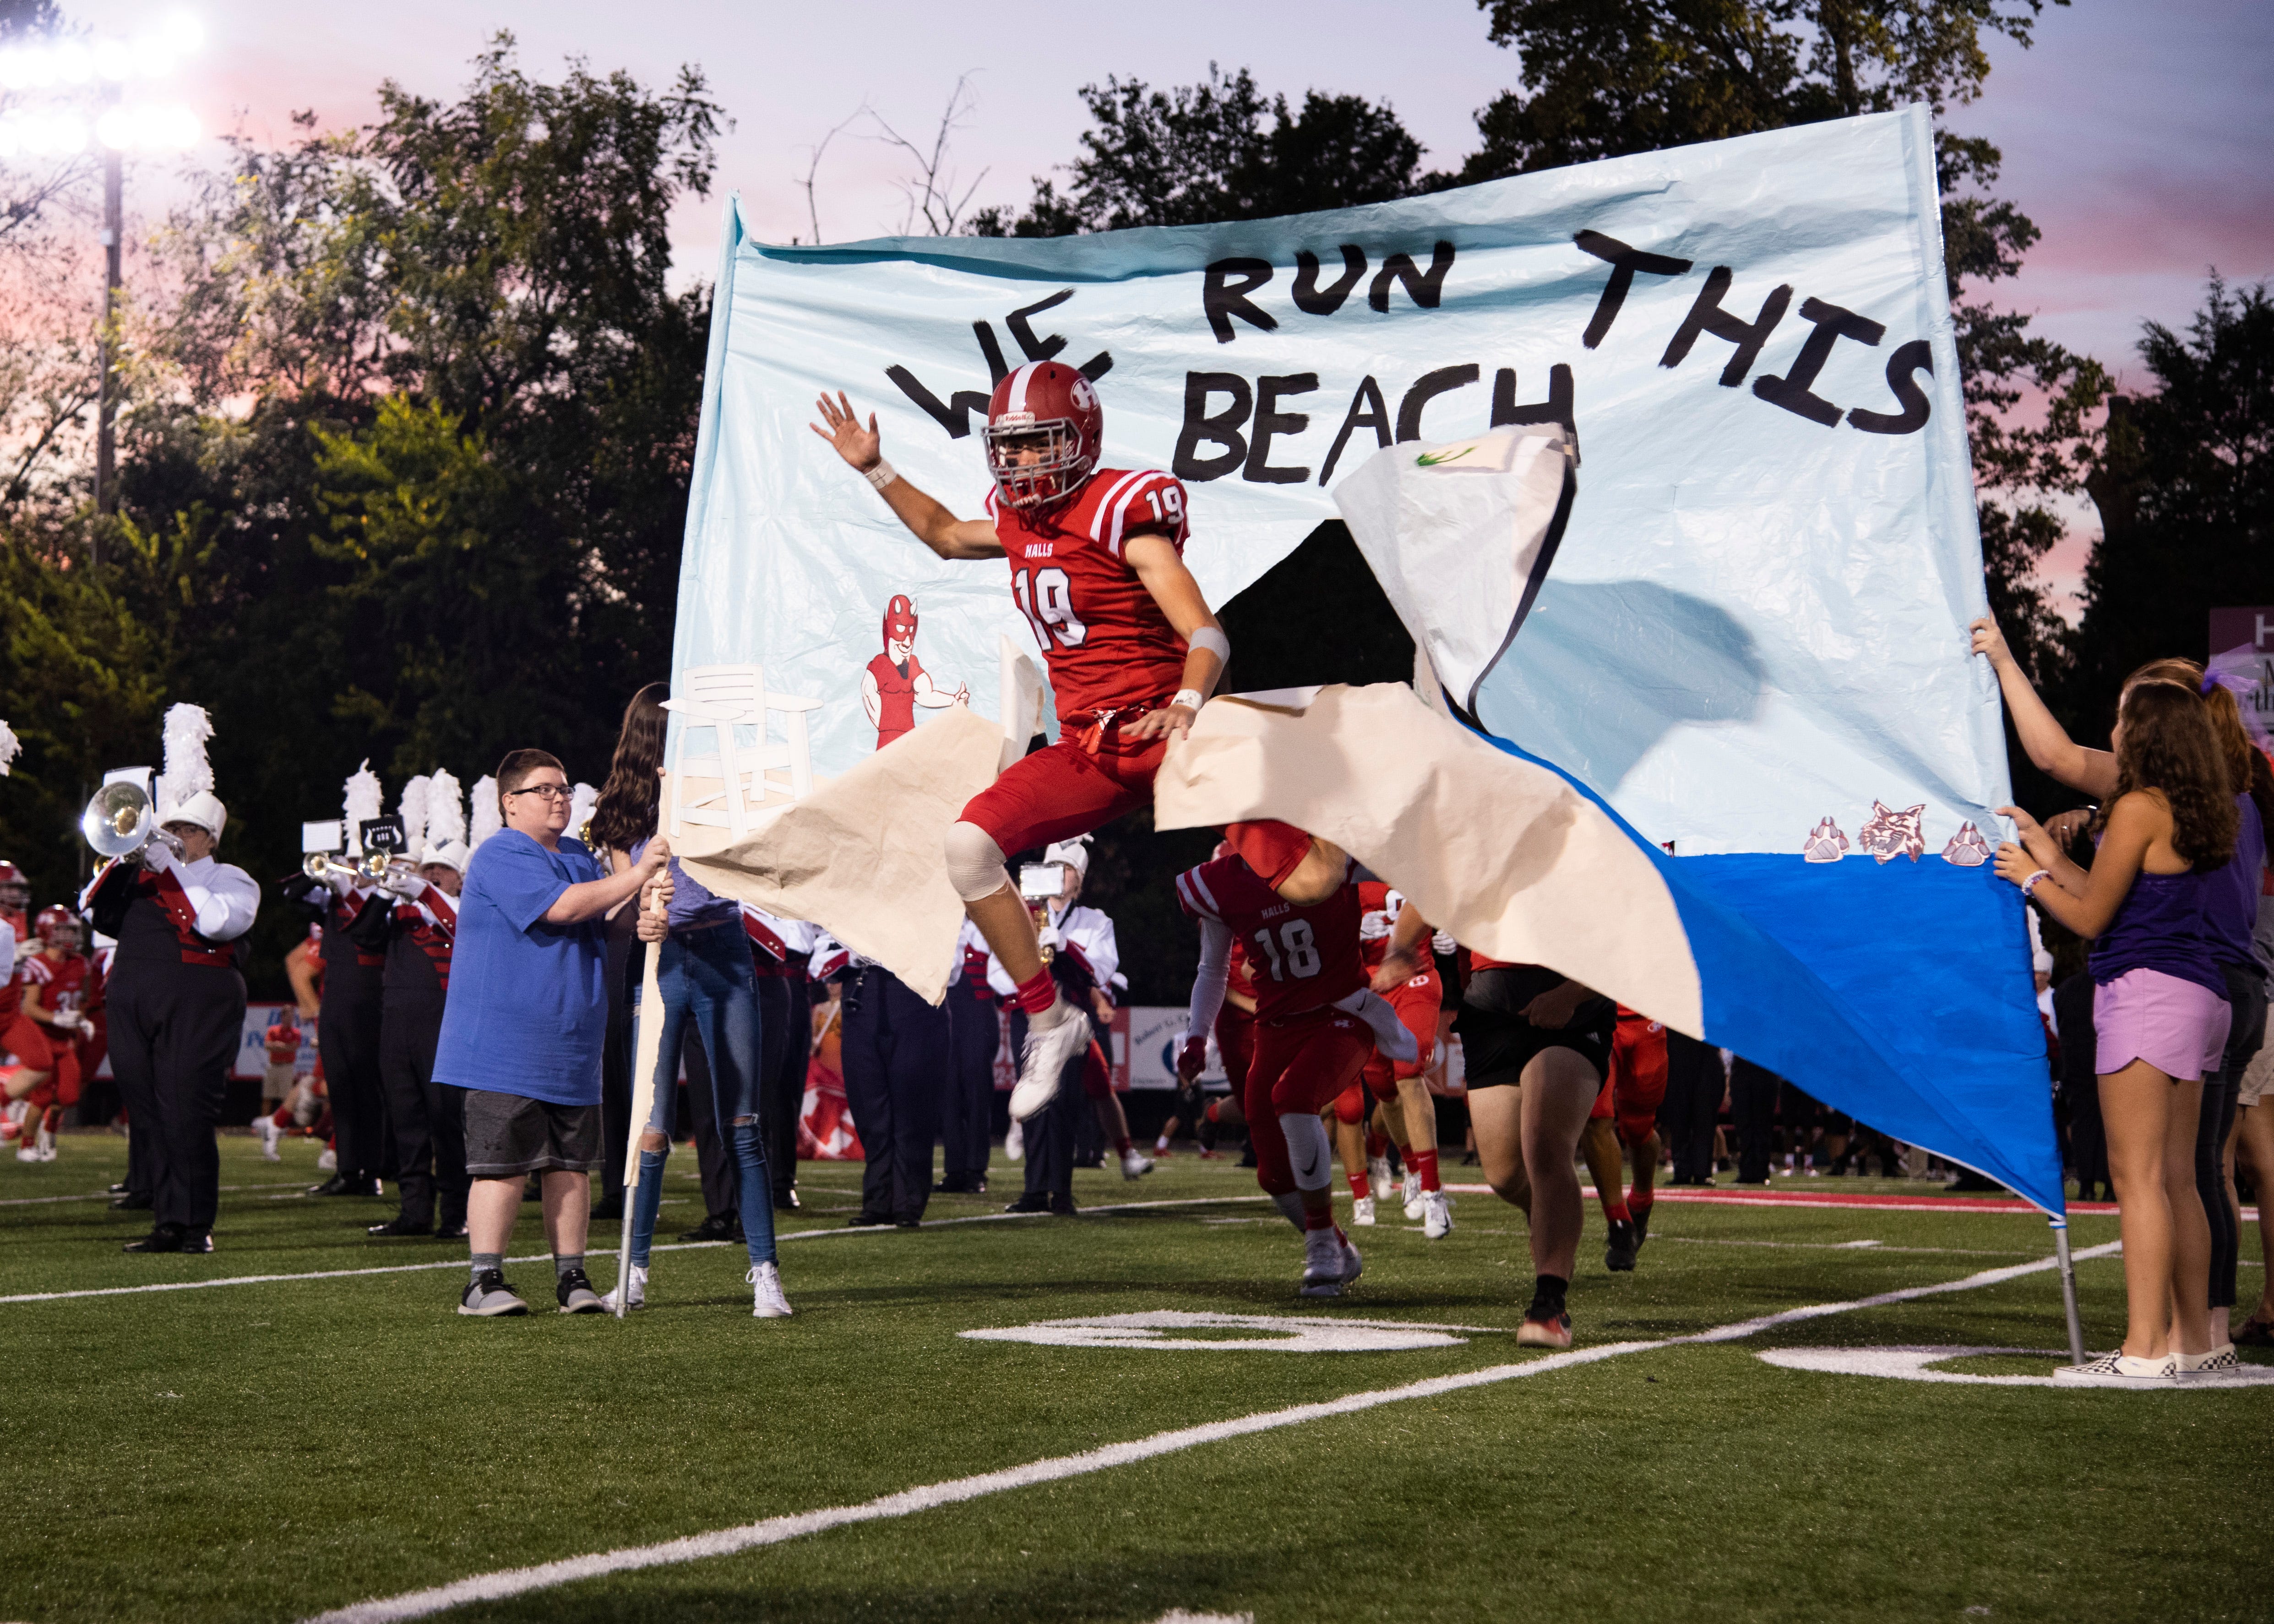 Halls' Brayden Beal (19) jumps through a spirit banner before the Halls and Central high school football game on Friday, October 4, 2019 at Halls High School.